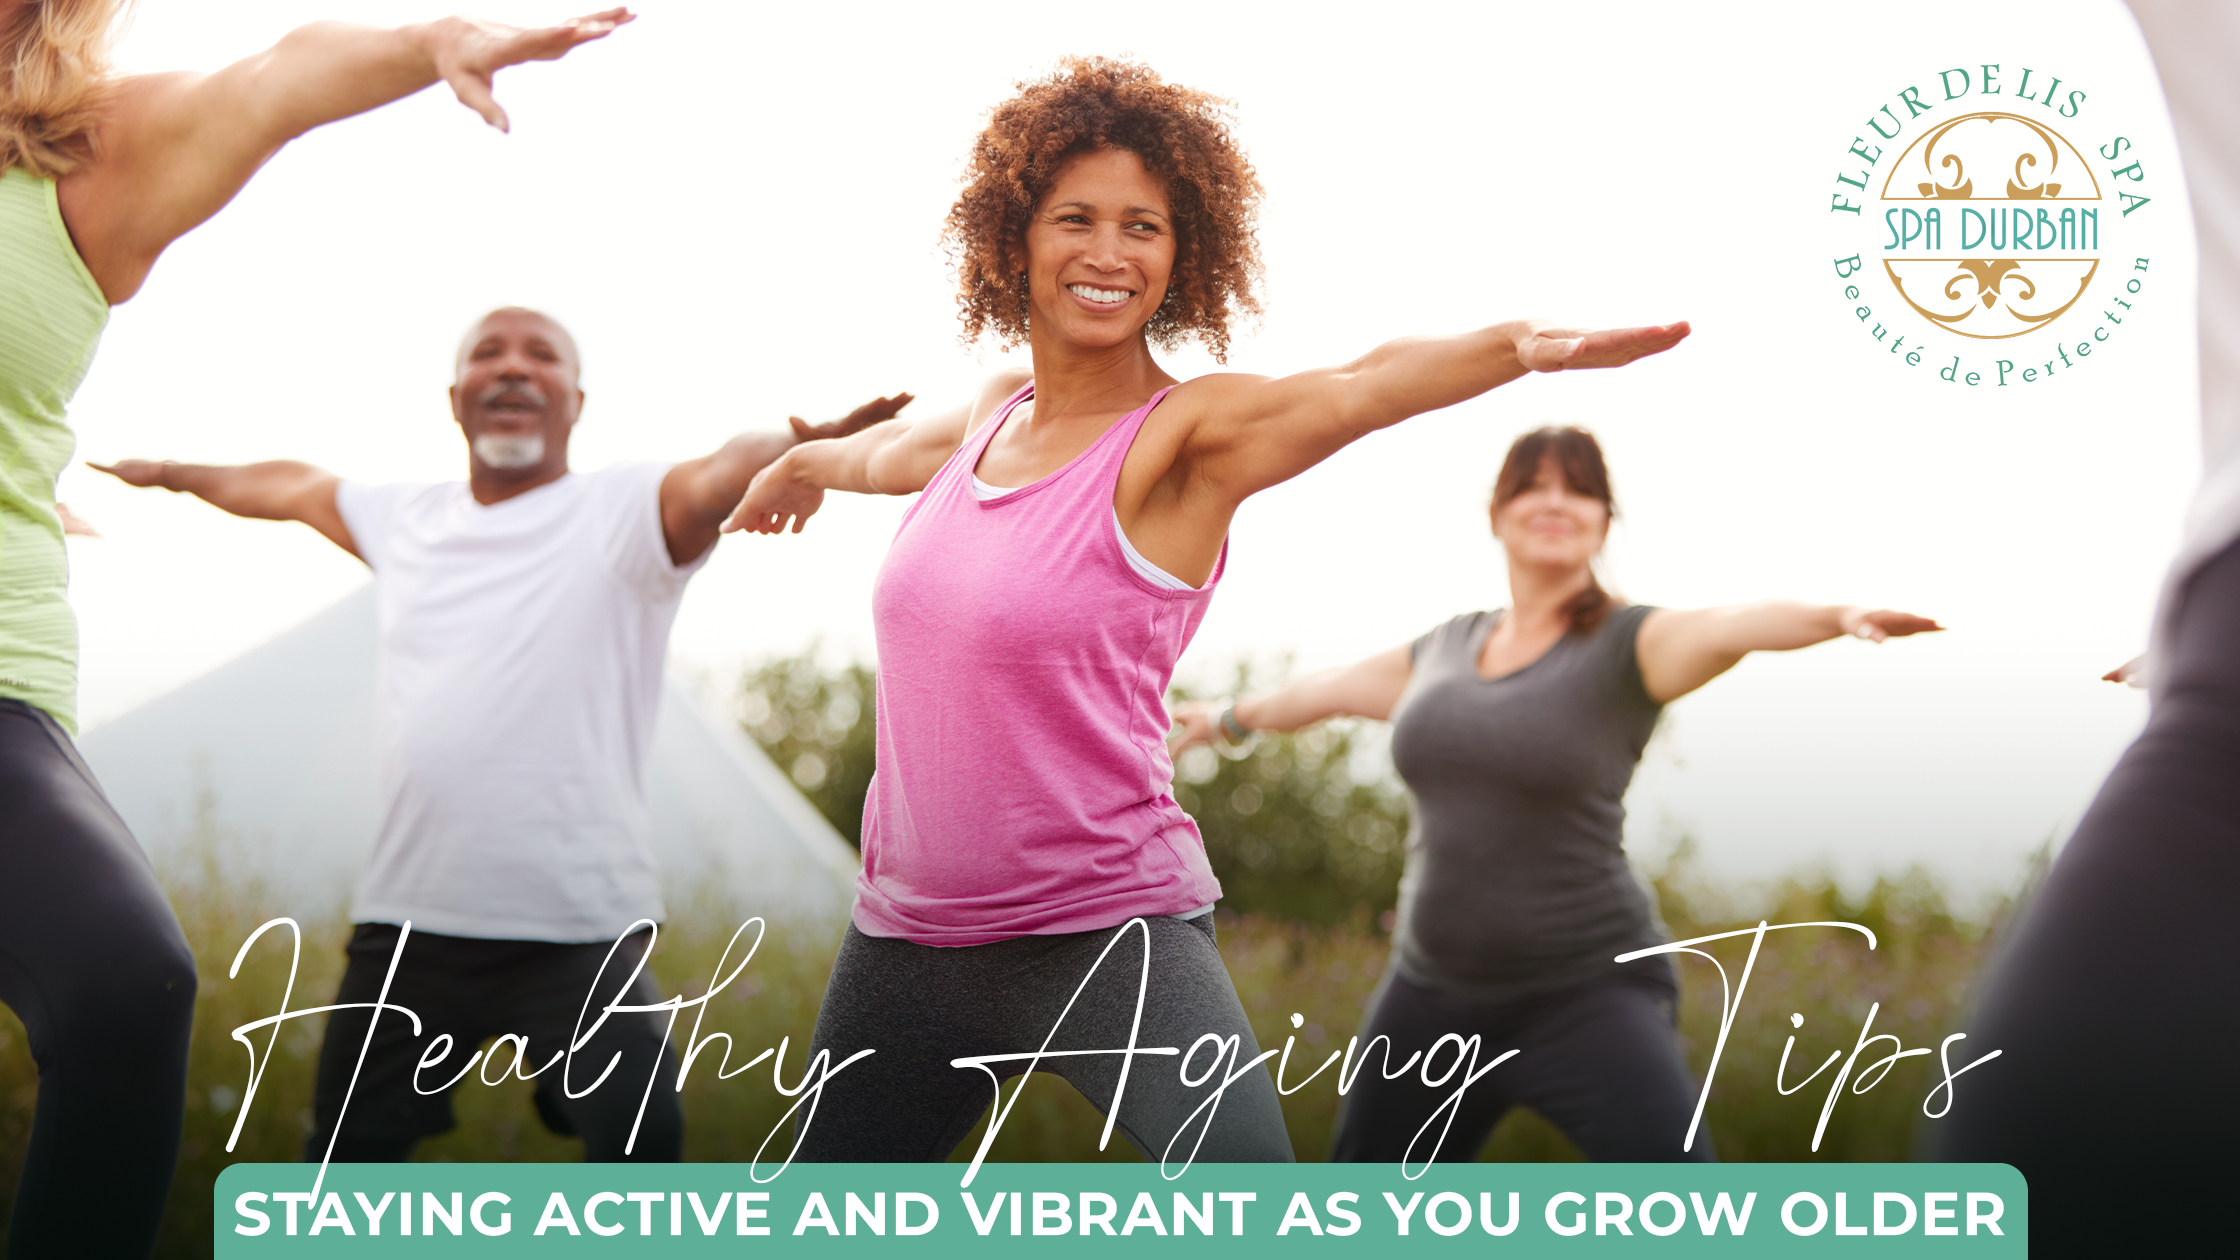 Healthy Aging: Tips for Staying Active and Vibrant as You Grow Older